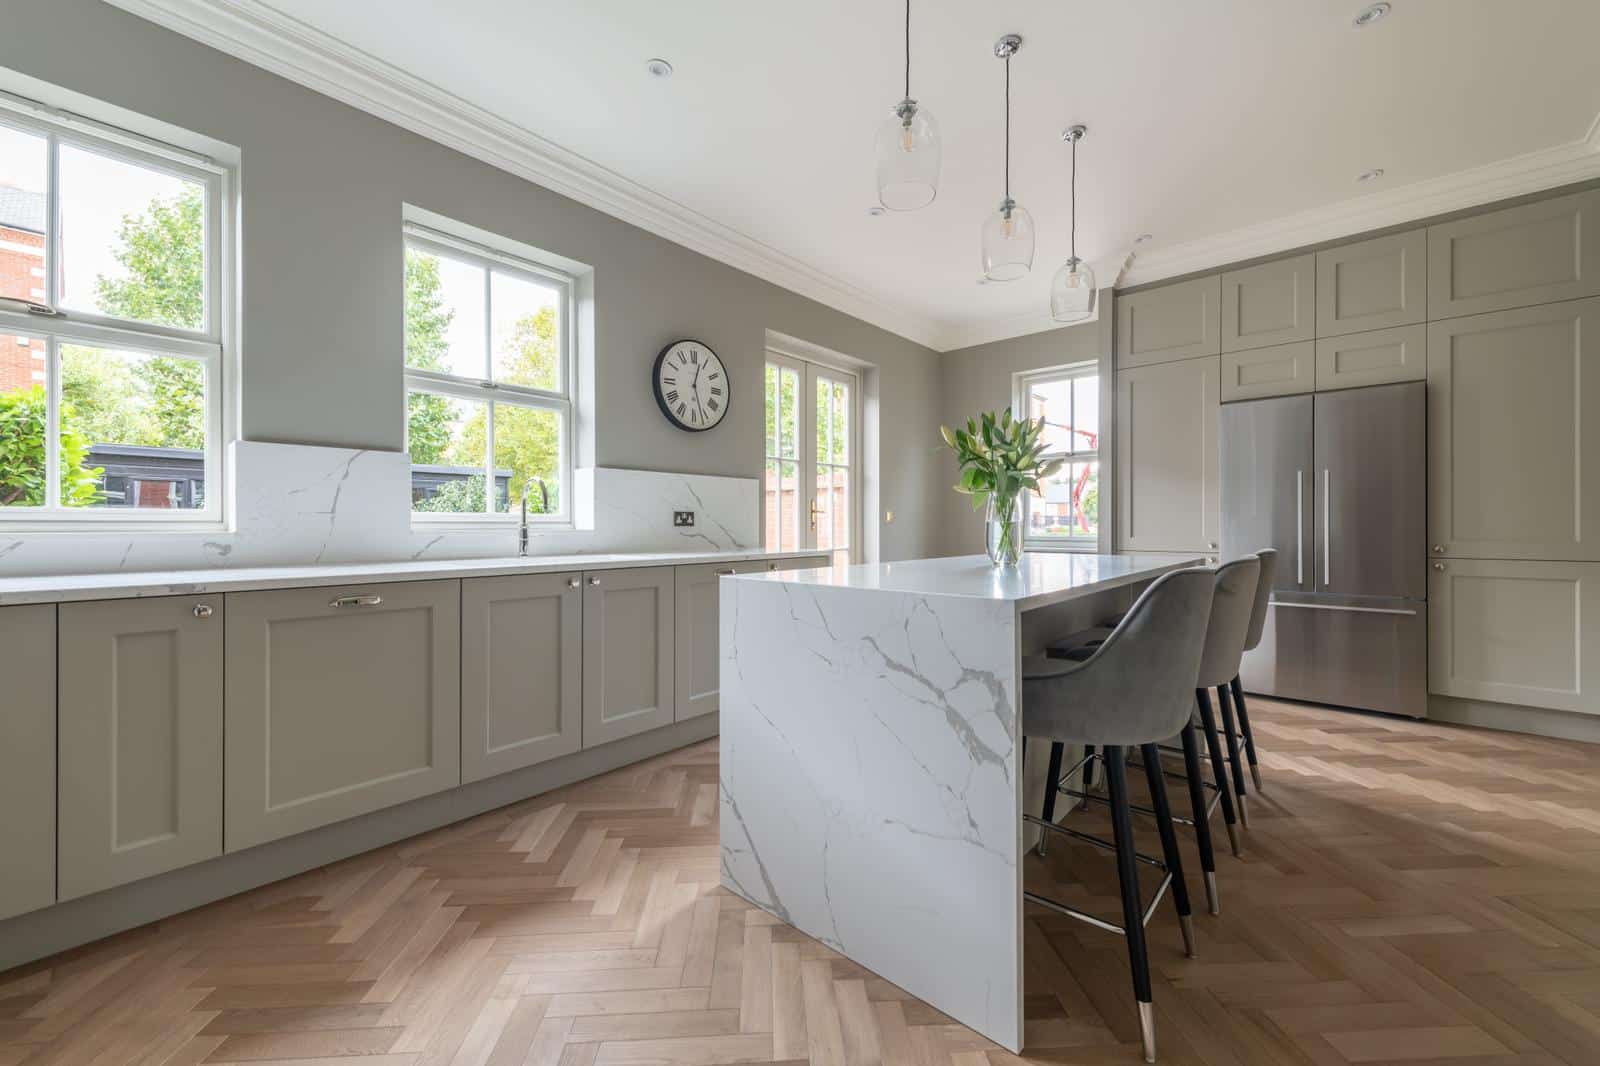 Our client selected the Istoria Bespoke St. Pauls for the residential project in Essex in our smallest size, 15/4 x 70 x 350mm Herringbone, to be installed with a double border. The Istoria Bespoke St. Pauls is a smoked colour which gives the floor a varied range of complimentary tones to provide a completely unique finish and unlimited design options, as no two boards will be the same colour. Thank you to the client for sharing the beautiful photos with us. Project: Residential Installation: Jordan Andrews Limited Floor: Istoria Bespoke St. Pauls Specification: Prime Grade 15/4 x 70 x 350mm Herringbone